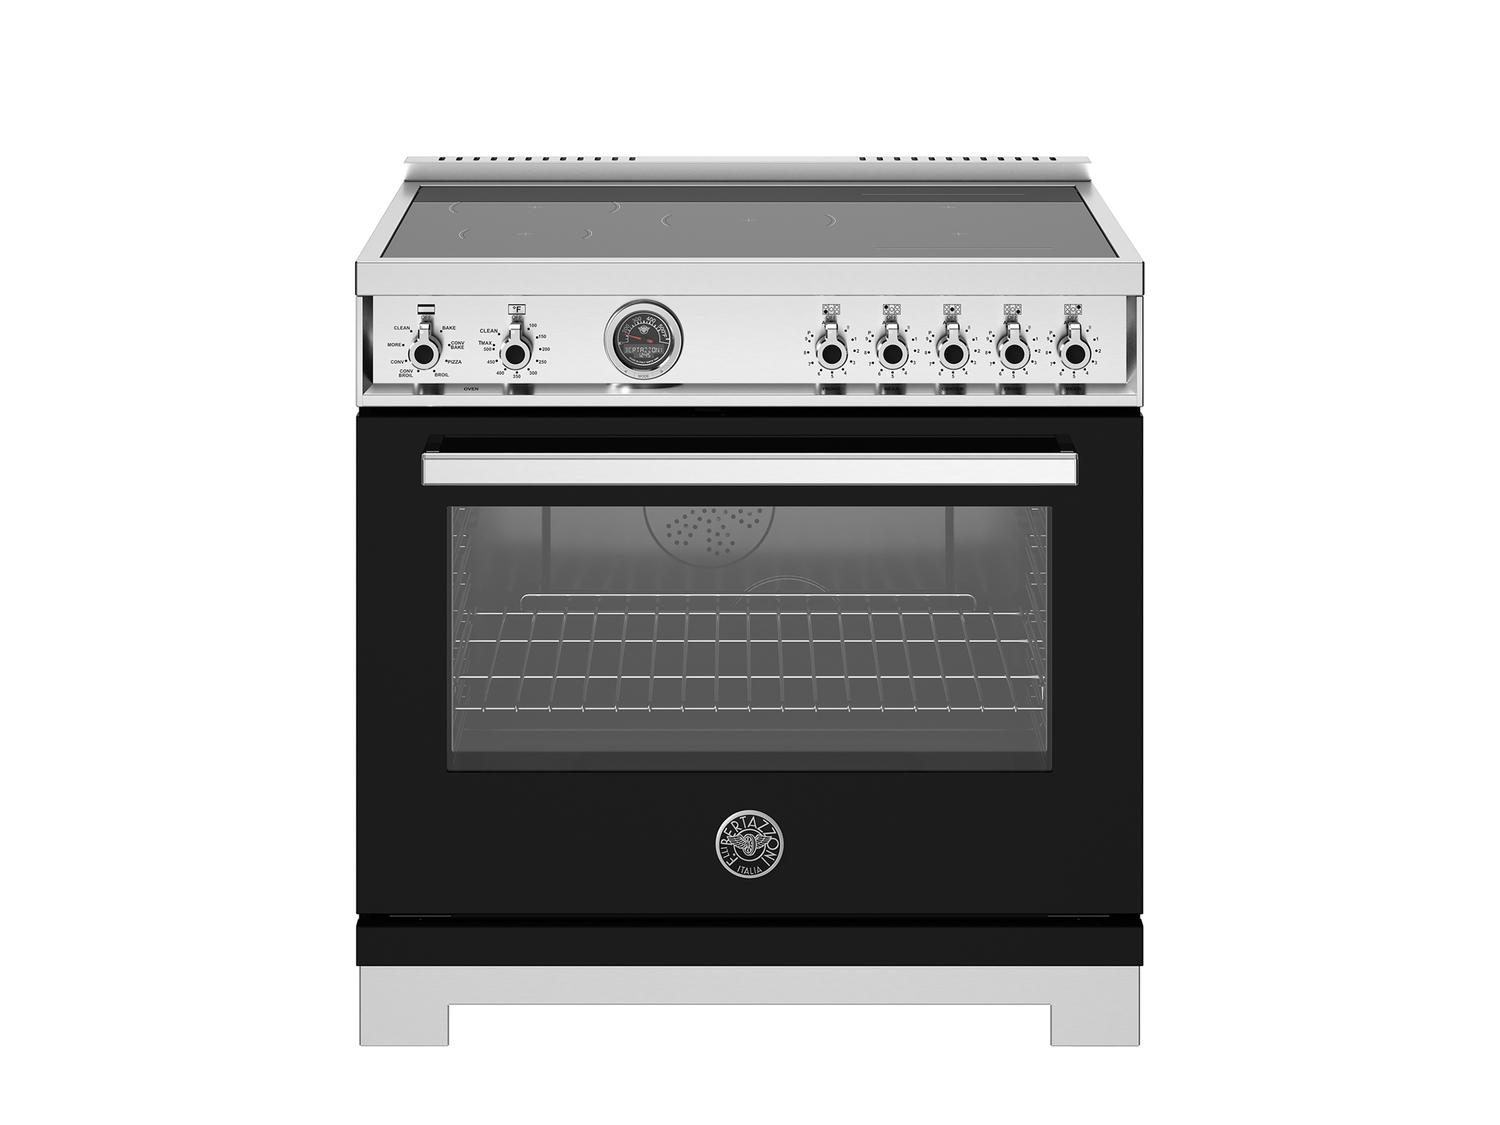 Bertazzoni PRO365ICFEPNET 36 Inch Induction Range, 5 Heating Zones And Cast Iron Griddle, Electric Self-Clean Oven Nero